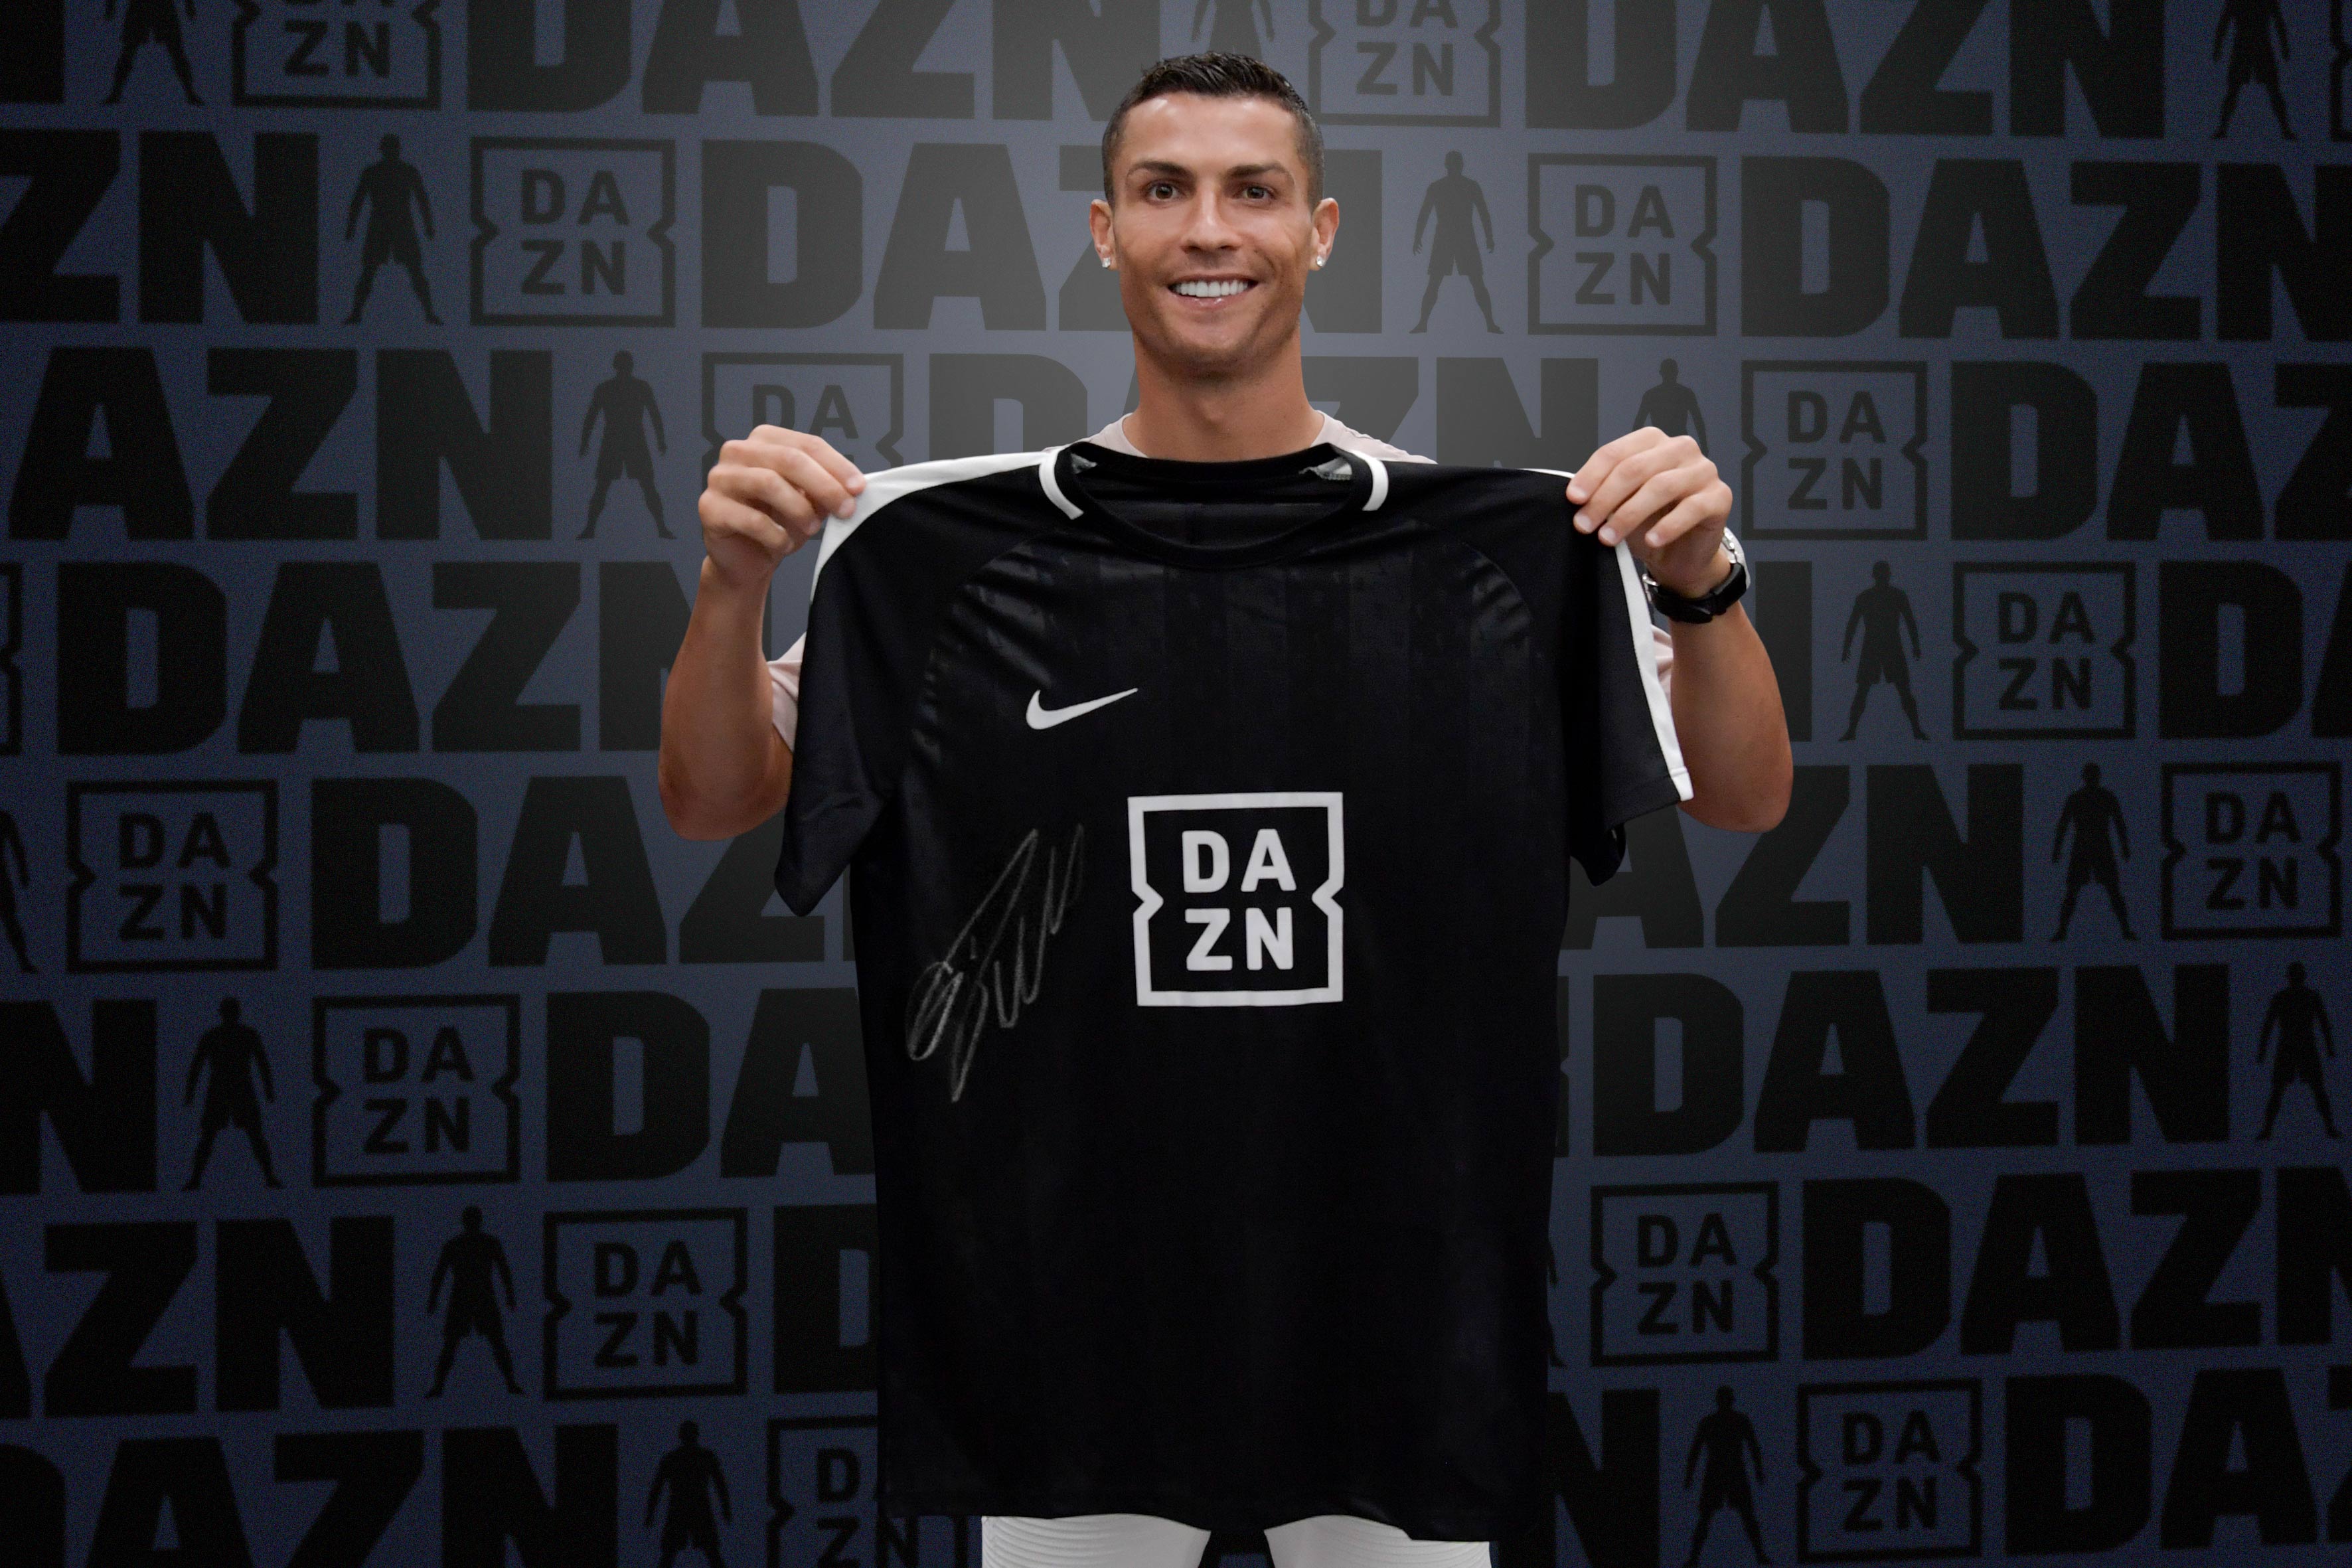 Cristiano Ronaldo The sports streaming service DAZN aim to build on back of Juventus forwards endorsement